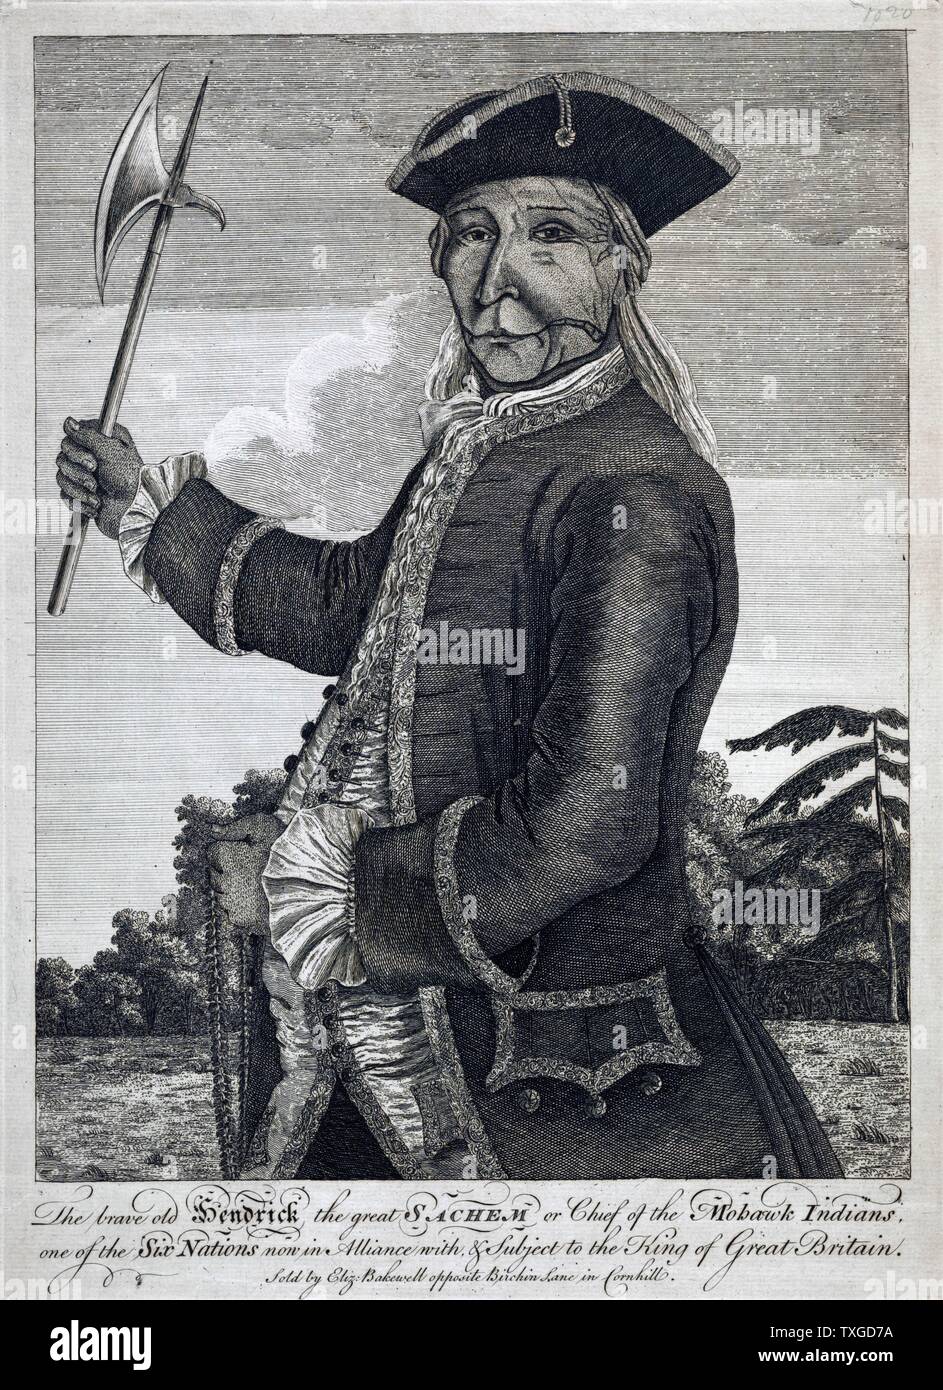 The brave old Hendrick the great sachem or chief of the Mohawk Indians. Print shows Hendrick, Tiyanoka, also spelled Theyanoguin or Tee Yee Neen Ho Ga Row, the great Mohawk sachem, wearing European style military uniform. Hendrick was one of four Mohawk Indians who visited England in 1710 and again in 1740. On his second visit he received elaborate court clothing trimmed with gold lace. Hendrick negotiated peace between the Six Nations and Great Britain at the Albany Conference of 1754. He was killed during the Battle of Lake George on September 8, 1755. Stock Photo